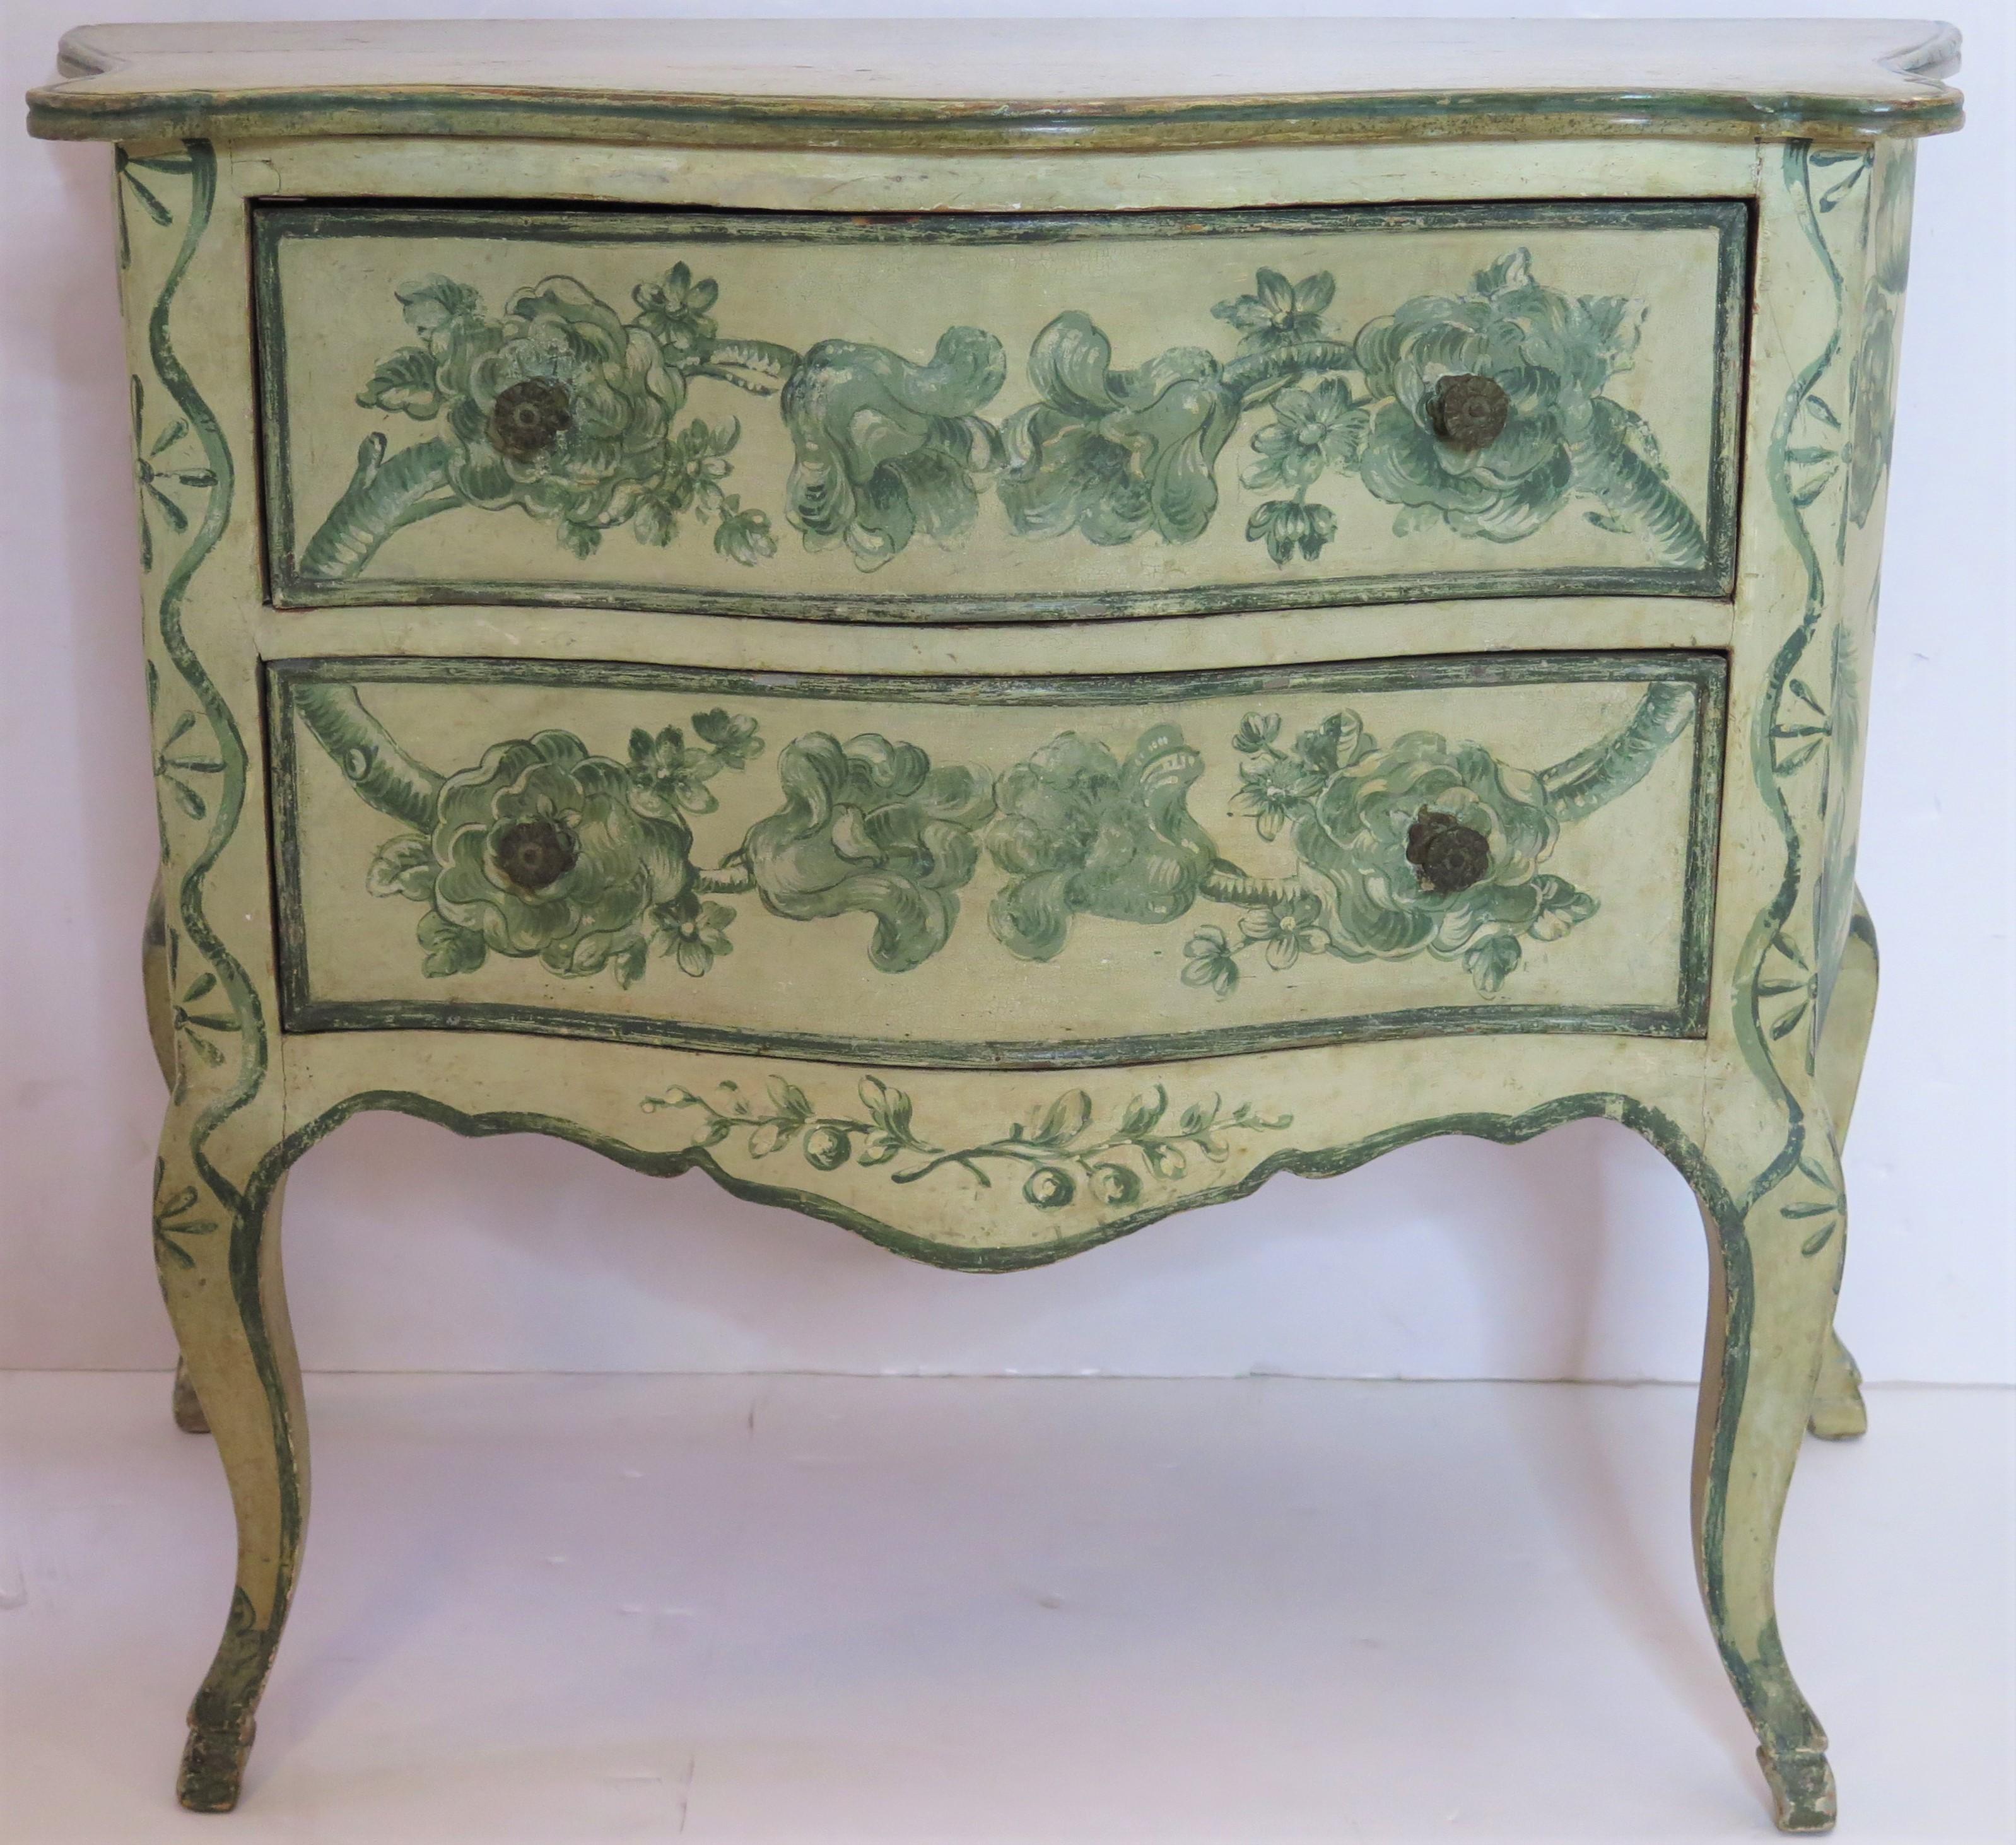 An early Louis XIV-style painted Venetian commode. Faux painted top above two drawers painted with fanciful flowers on the front. The sides of the commode are painted with birds and flowers.

Italy, first half of the 18th century / circa 1725